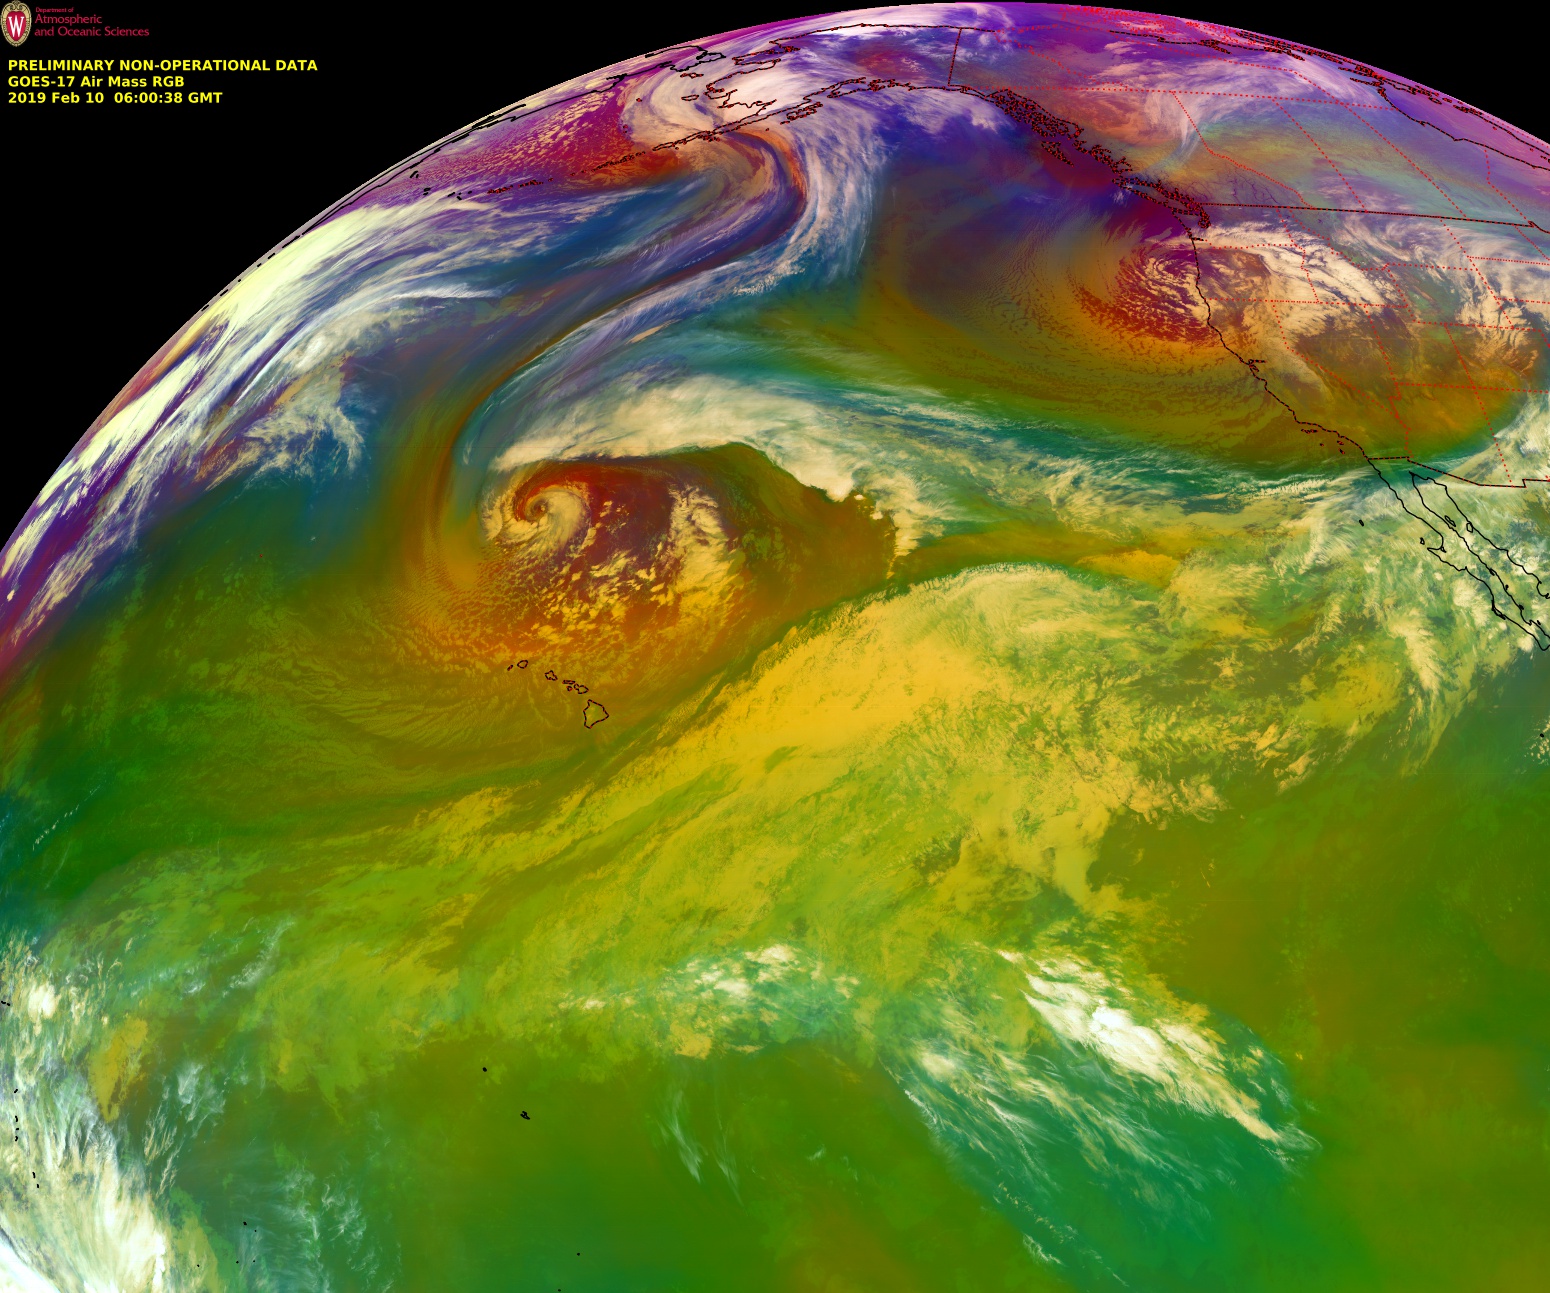 GOES-17 Air Mass RGB images [click to play MP4 animation]